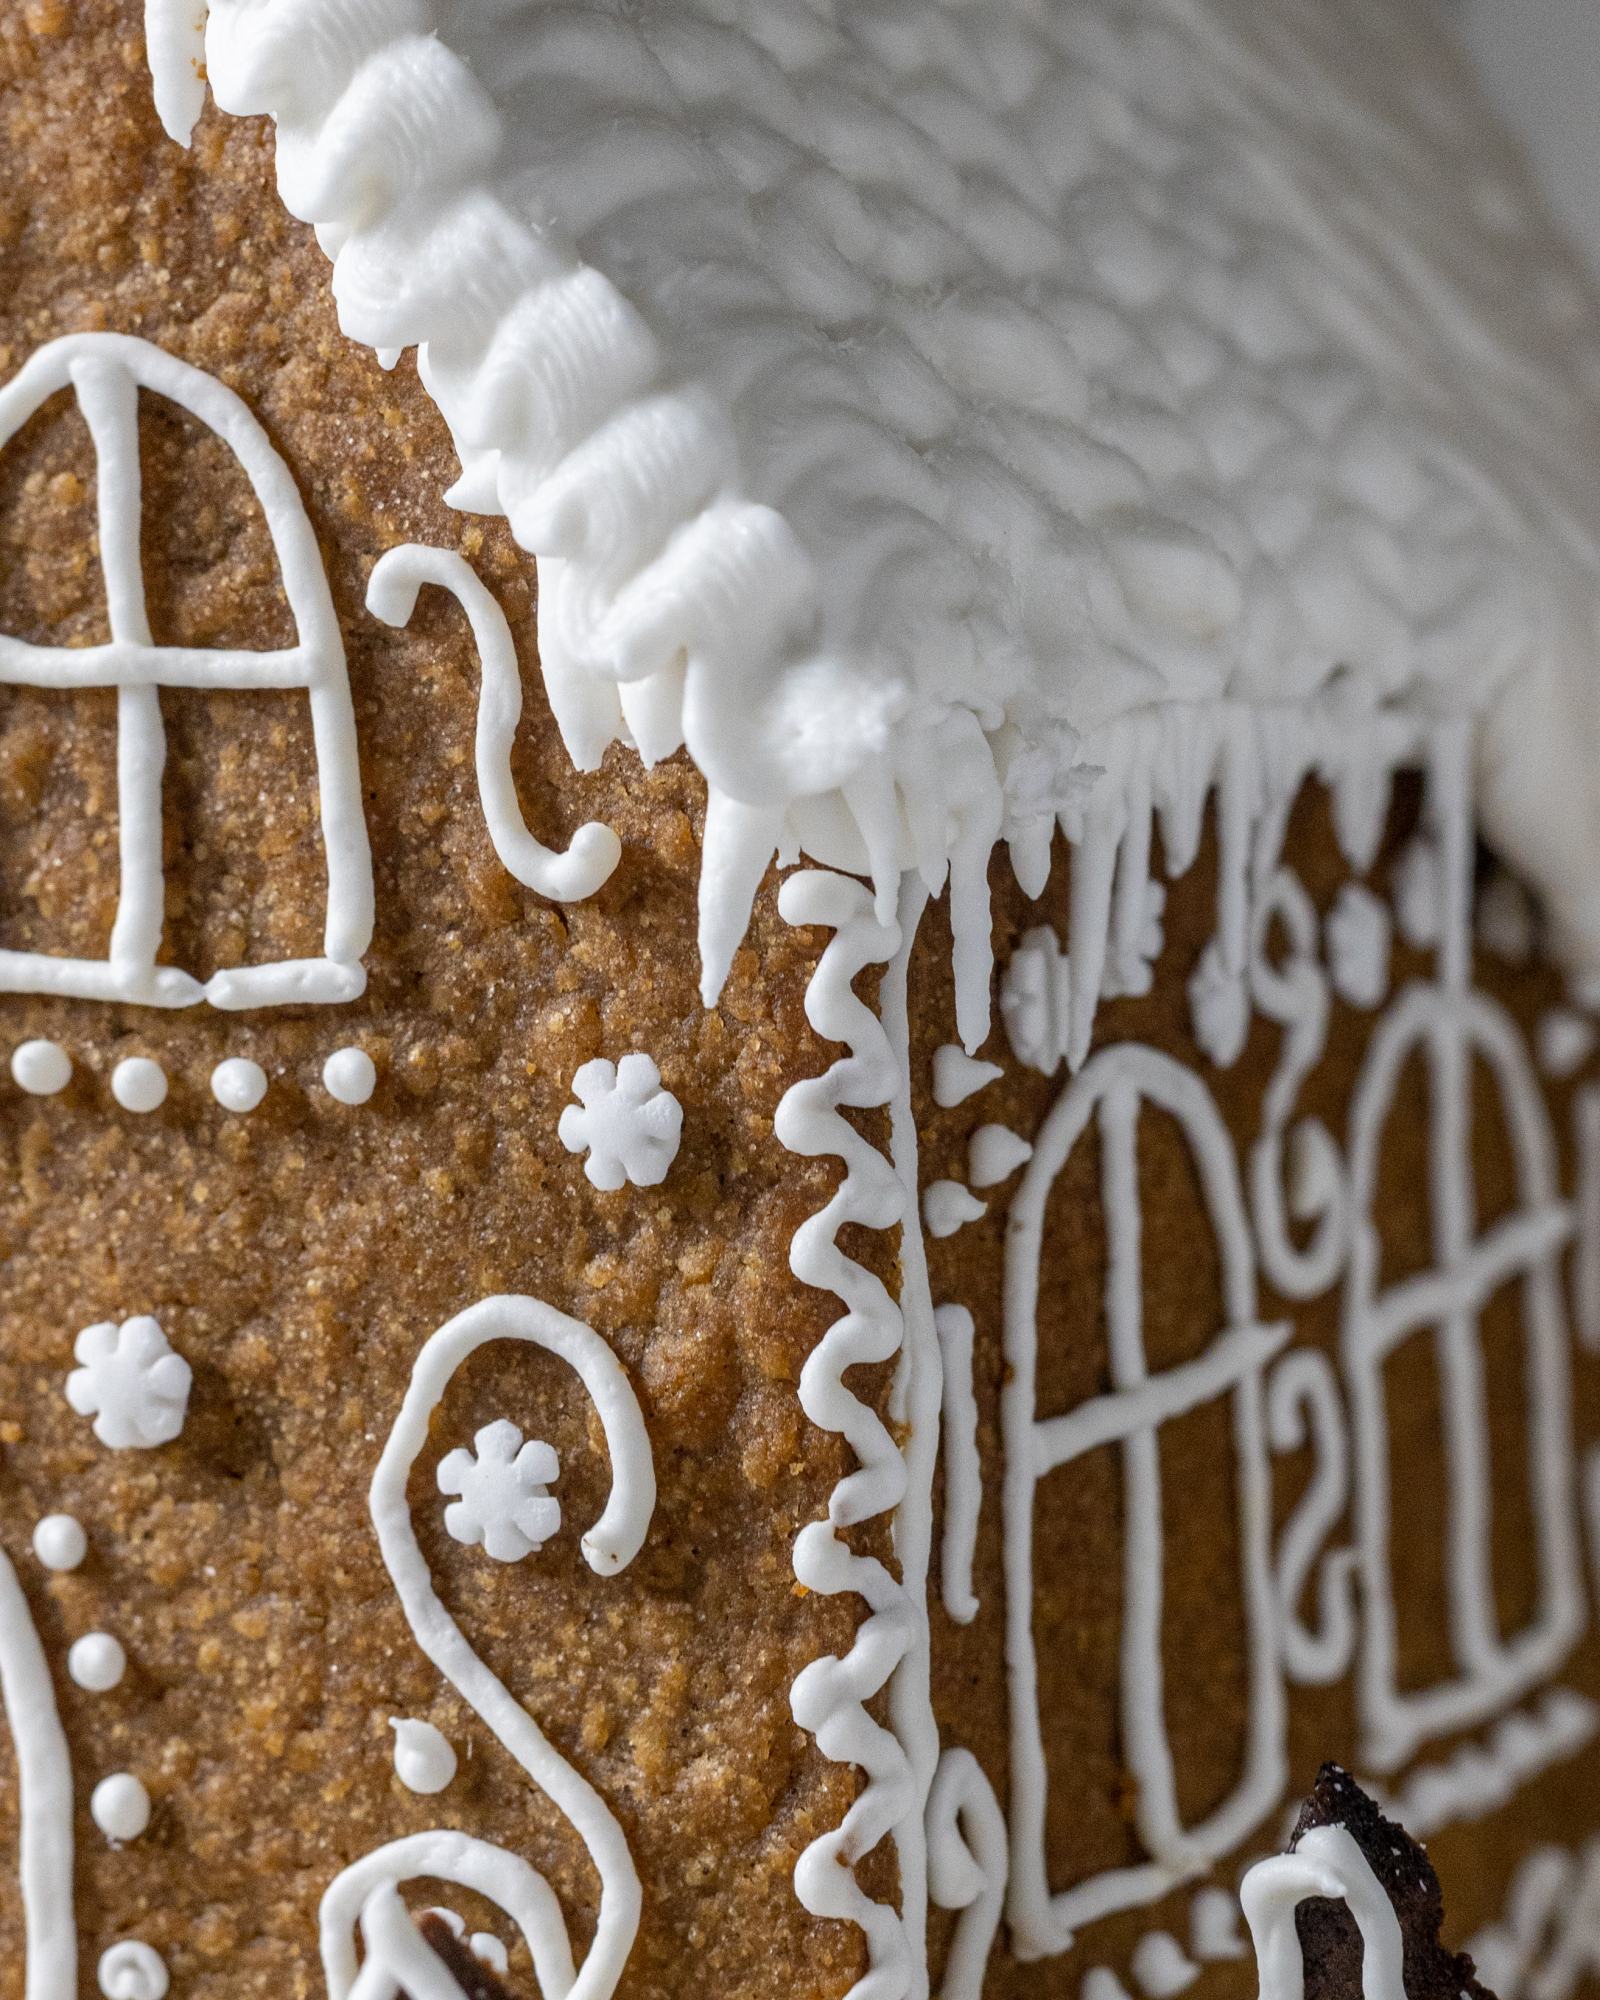 Vegan Gingerbread House, decorated with white buttercream and 'Ho Ho' written on the back, with white roof, photographed on a light backdrop with fairy lights